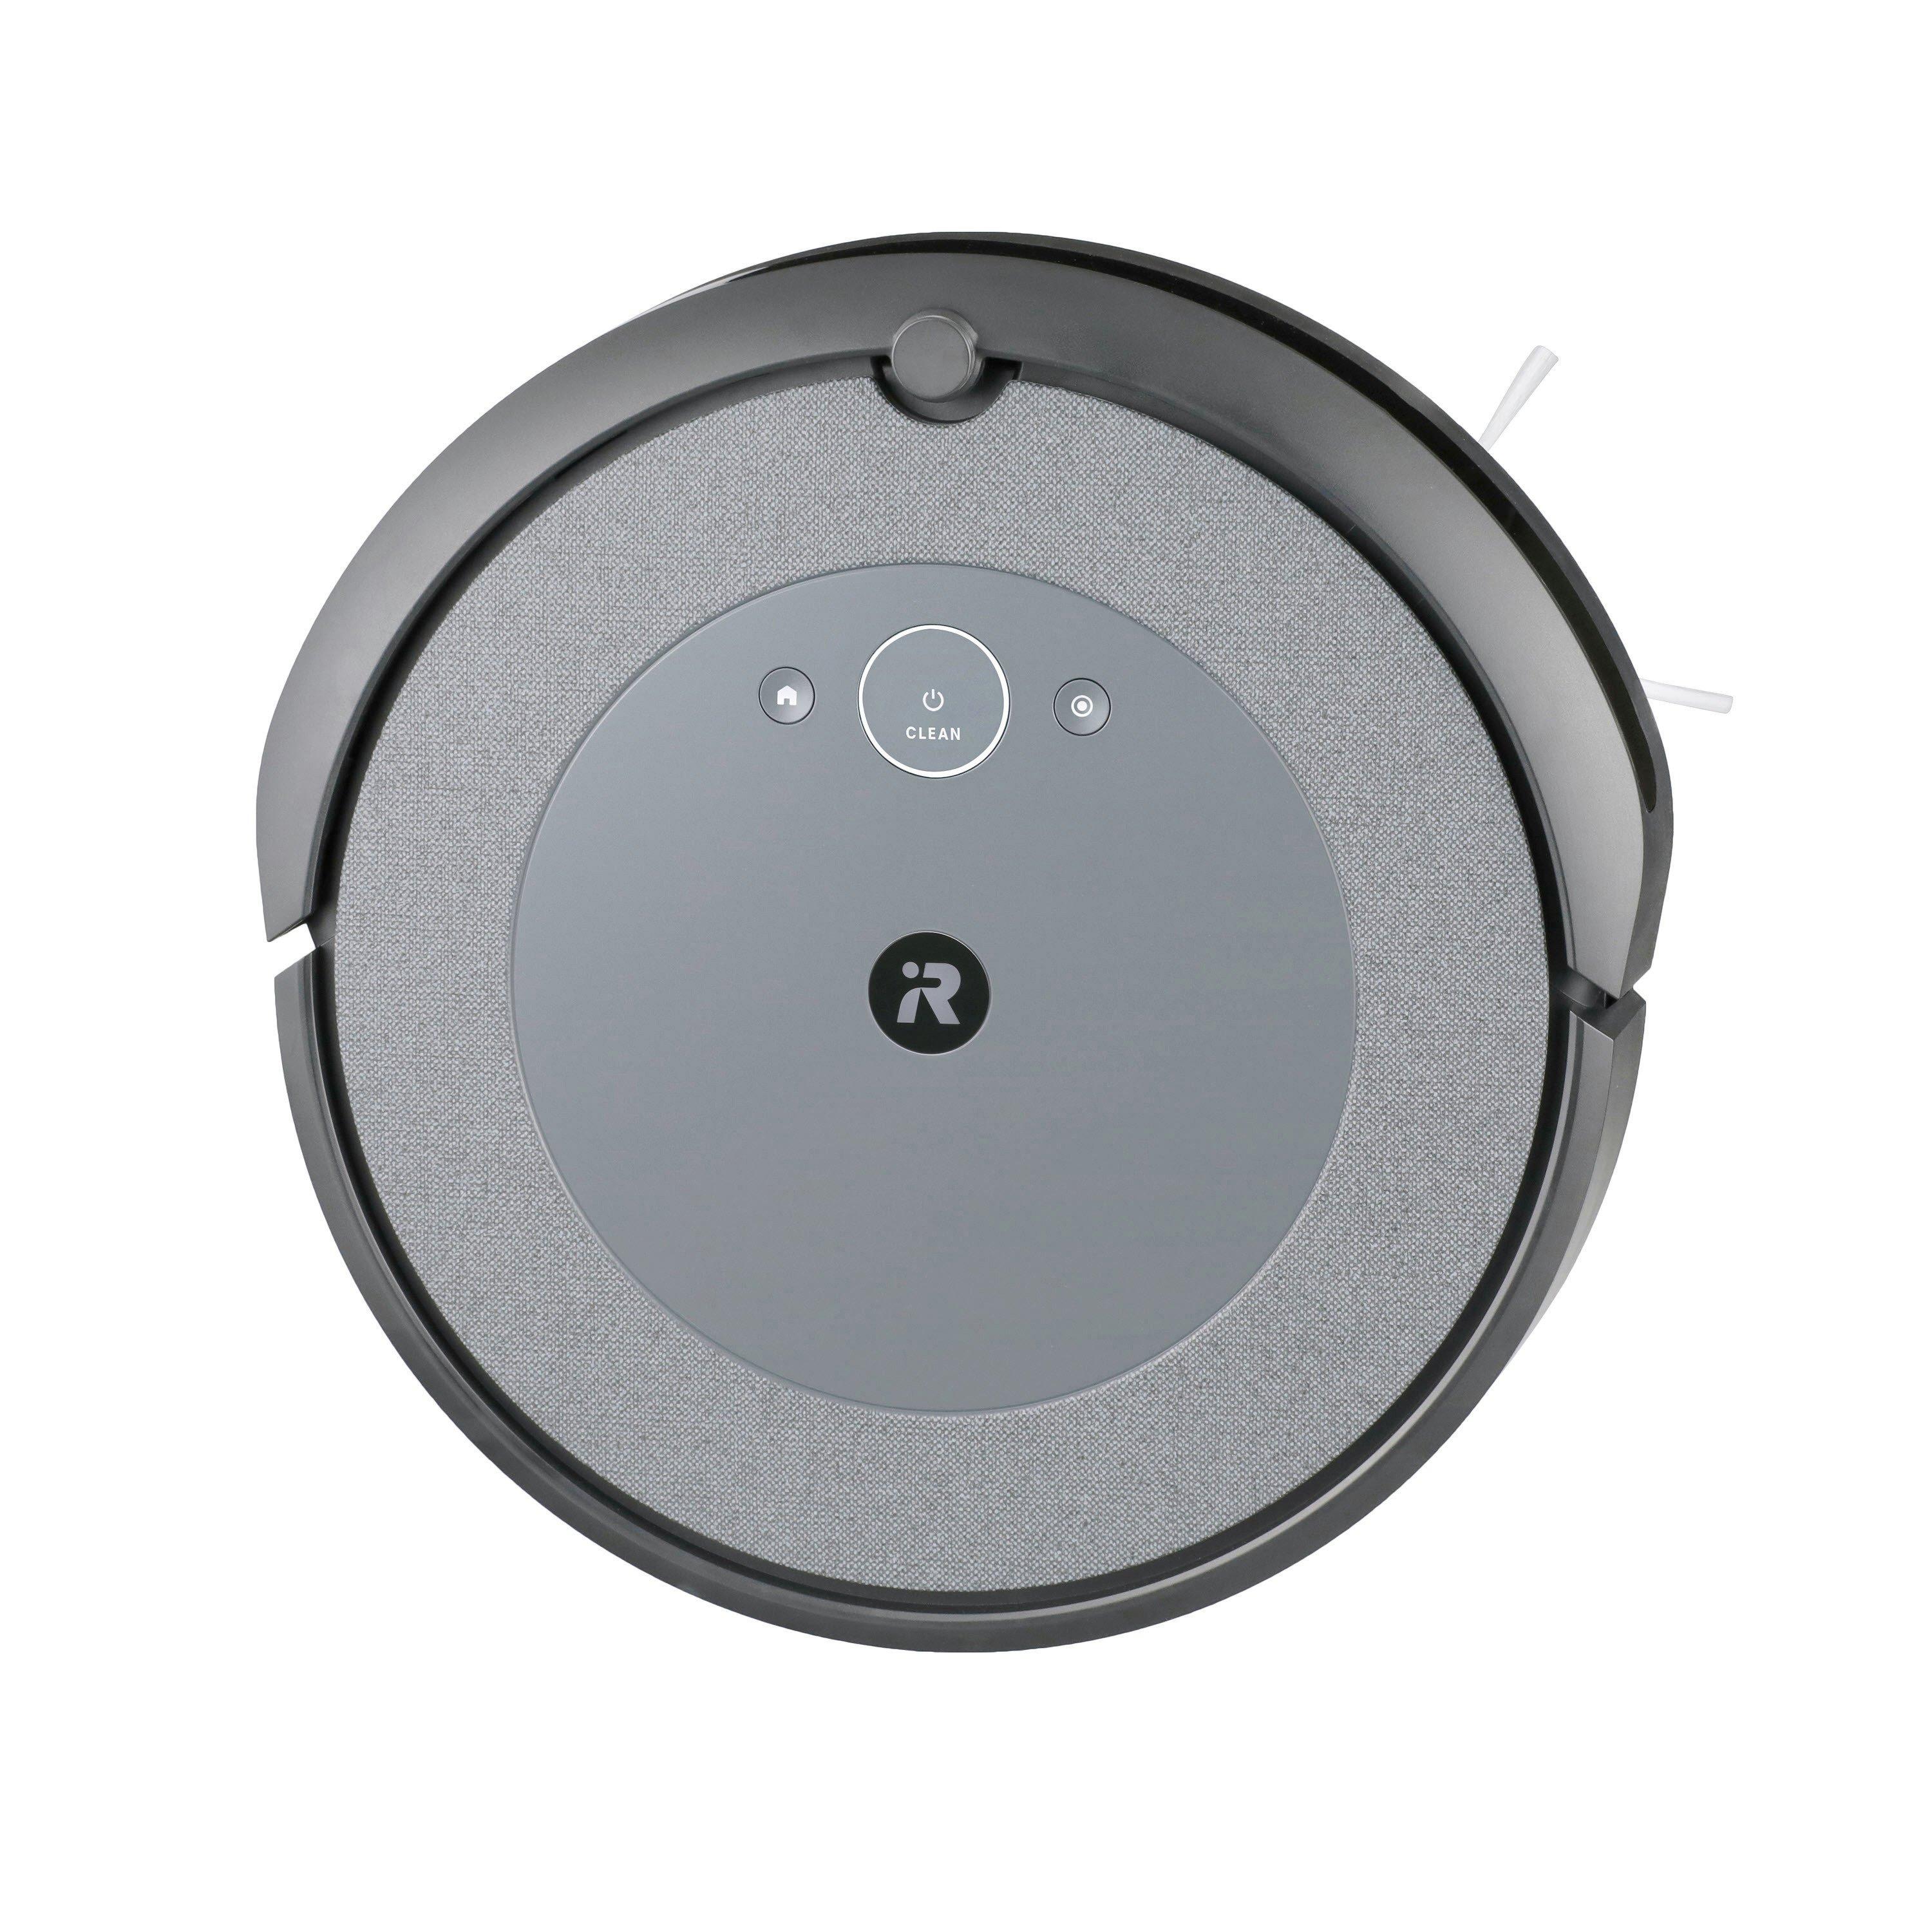 iRobot Roomba i3+ EVO (3550) Self-Emptying Robot Vacuum – Now Clean by Room  with Smart Mapping, Empties Itself for Up to 60 Days, Works with Alexa